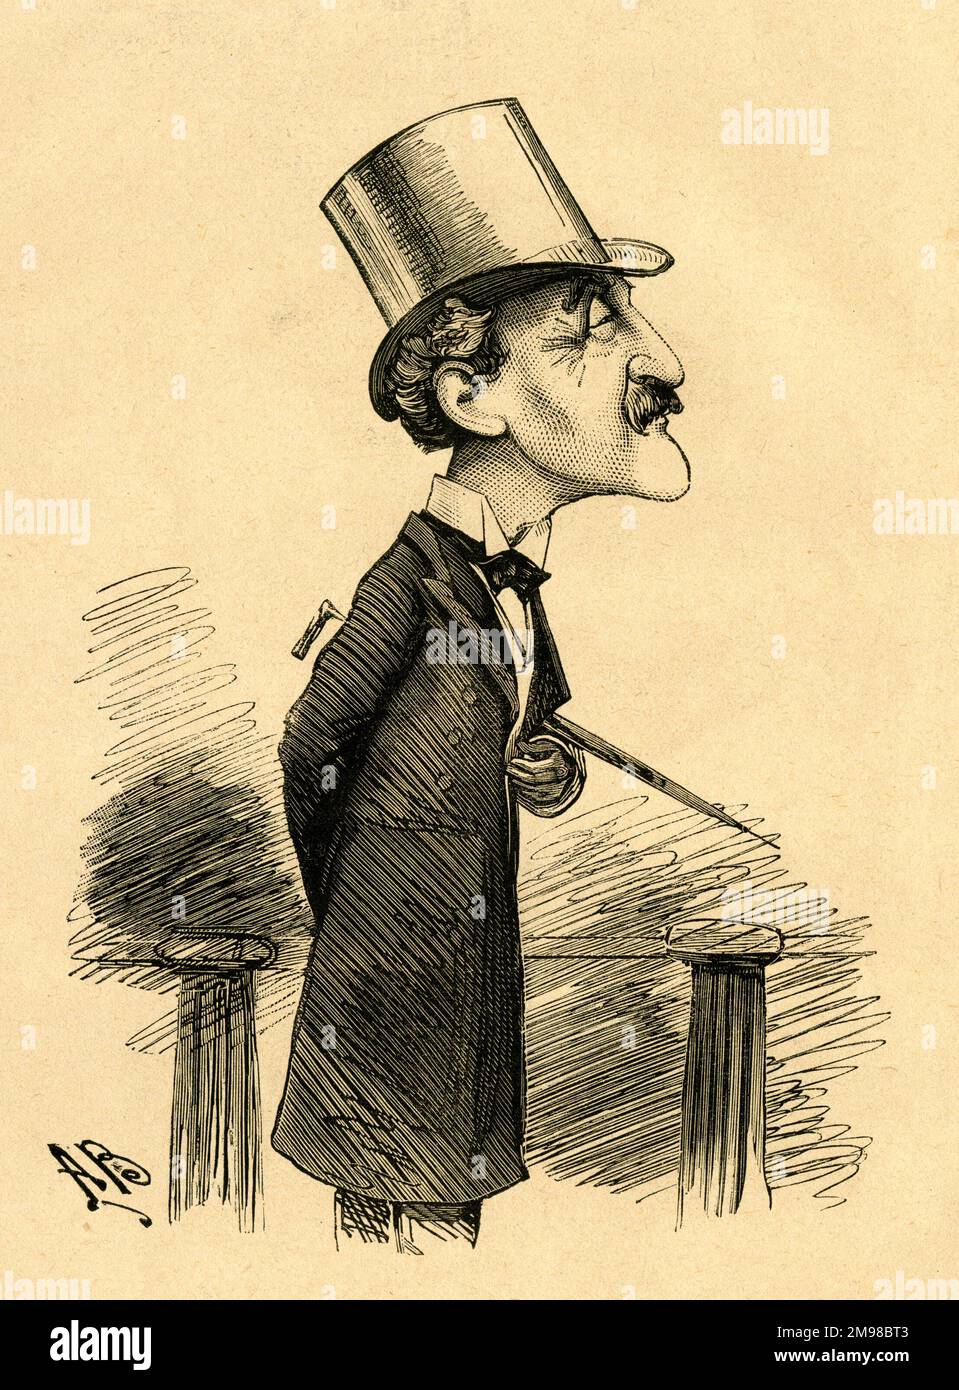 Cartoon, Wilhelm Kuhe (1823-1912), German pianist, piano teacher, composer, administrator, and promoter of concerts, including an annual festival, in Brighton -- Brighton's Grand (Pianoforte) Old Man. Stock Photo